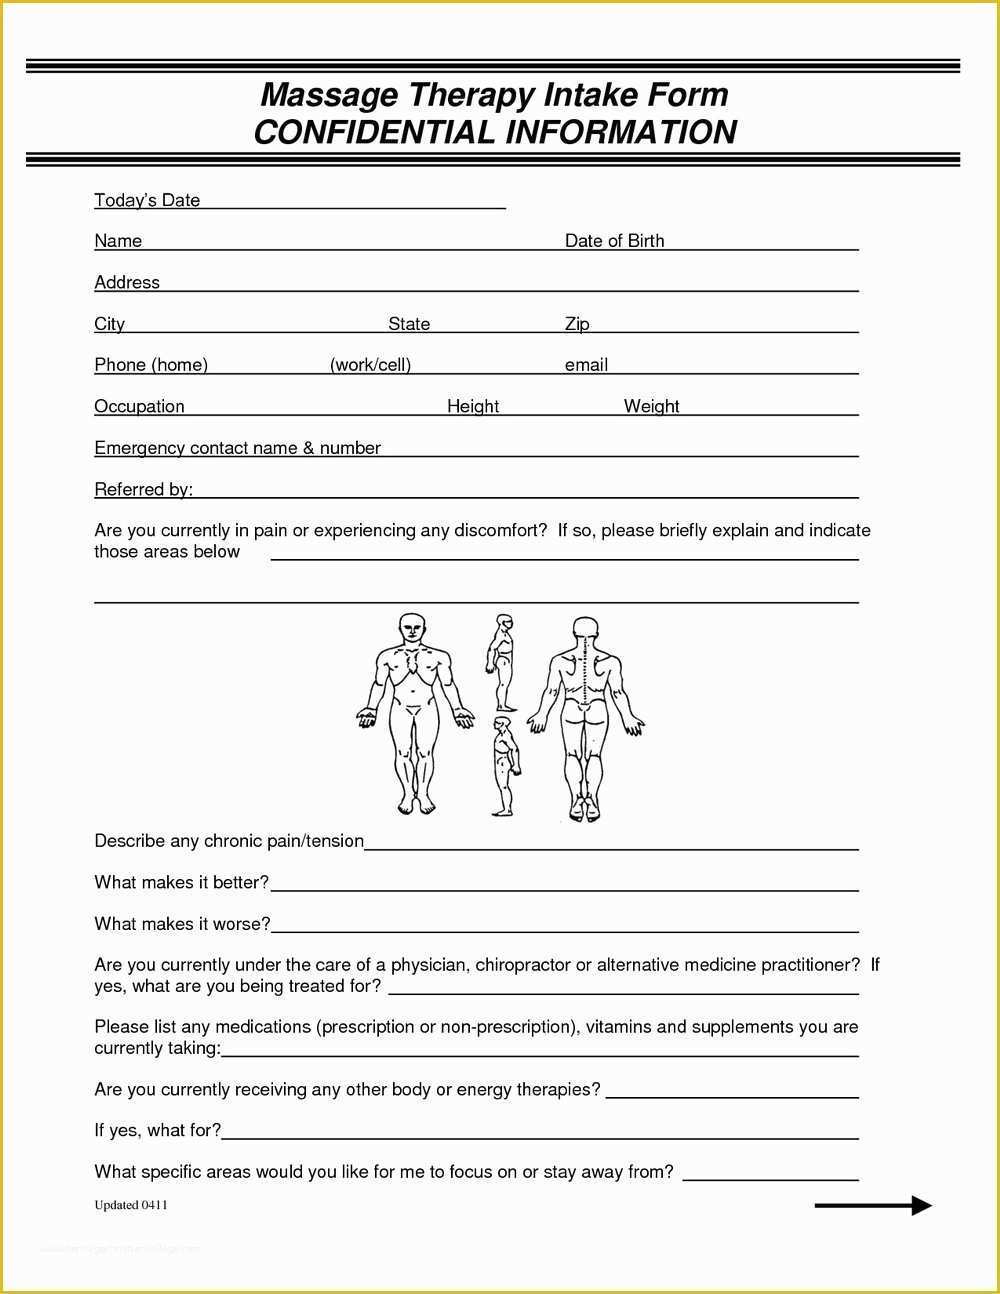 Chiropractic soap Notes Template Free Of Chiropractic Intake forms Doc forms 3330